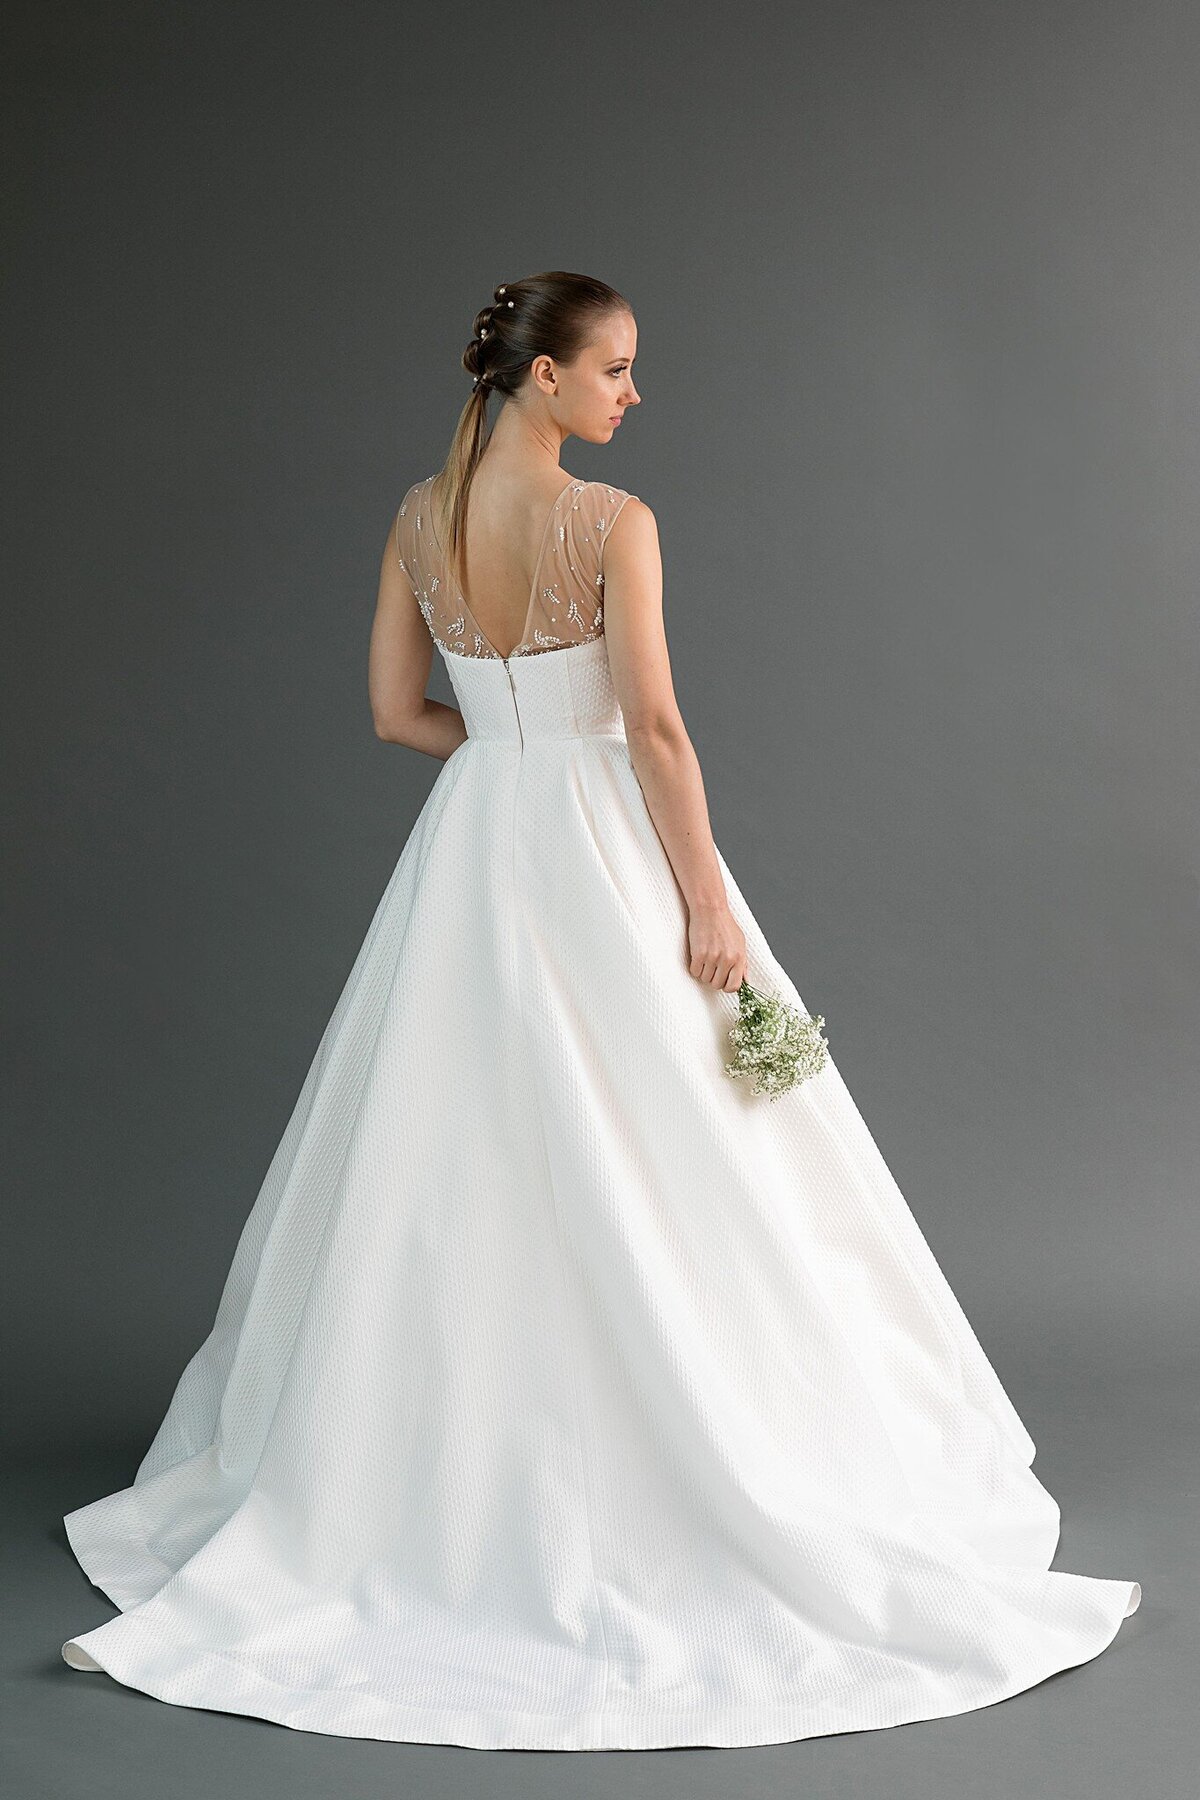 The body of this modern ballgown wedding dress is made from a textured dot jacquard.